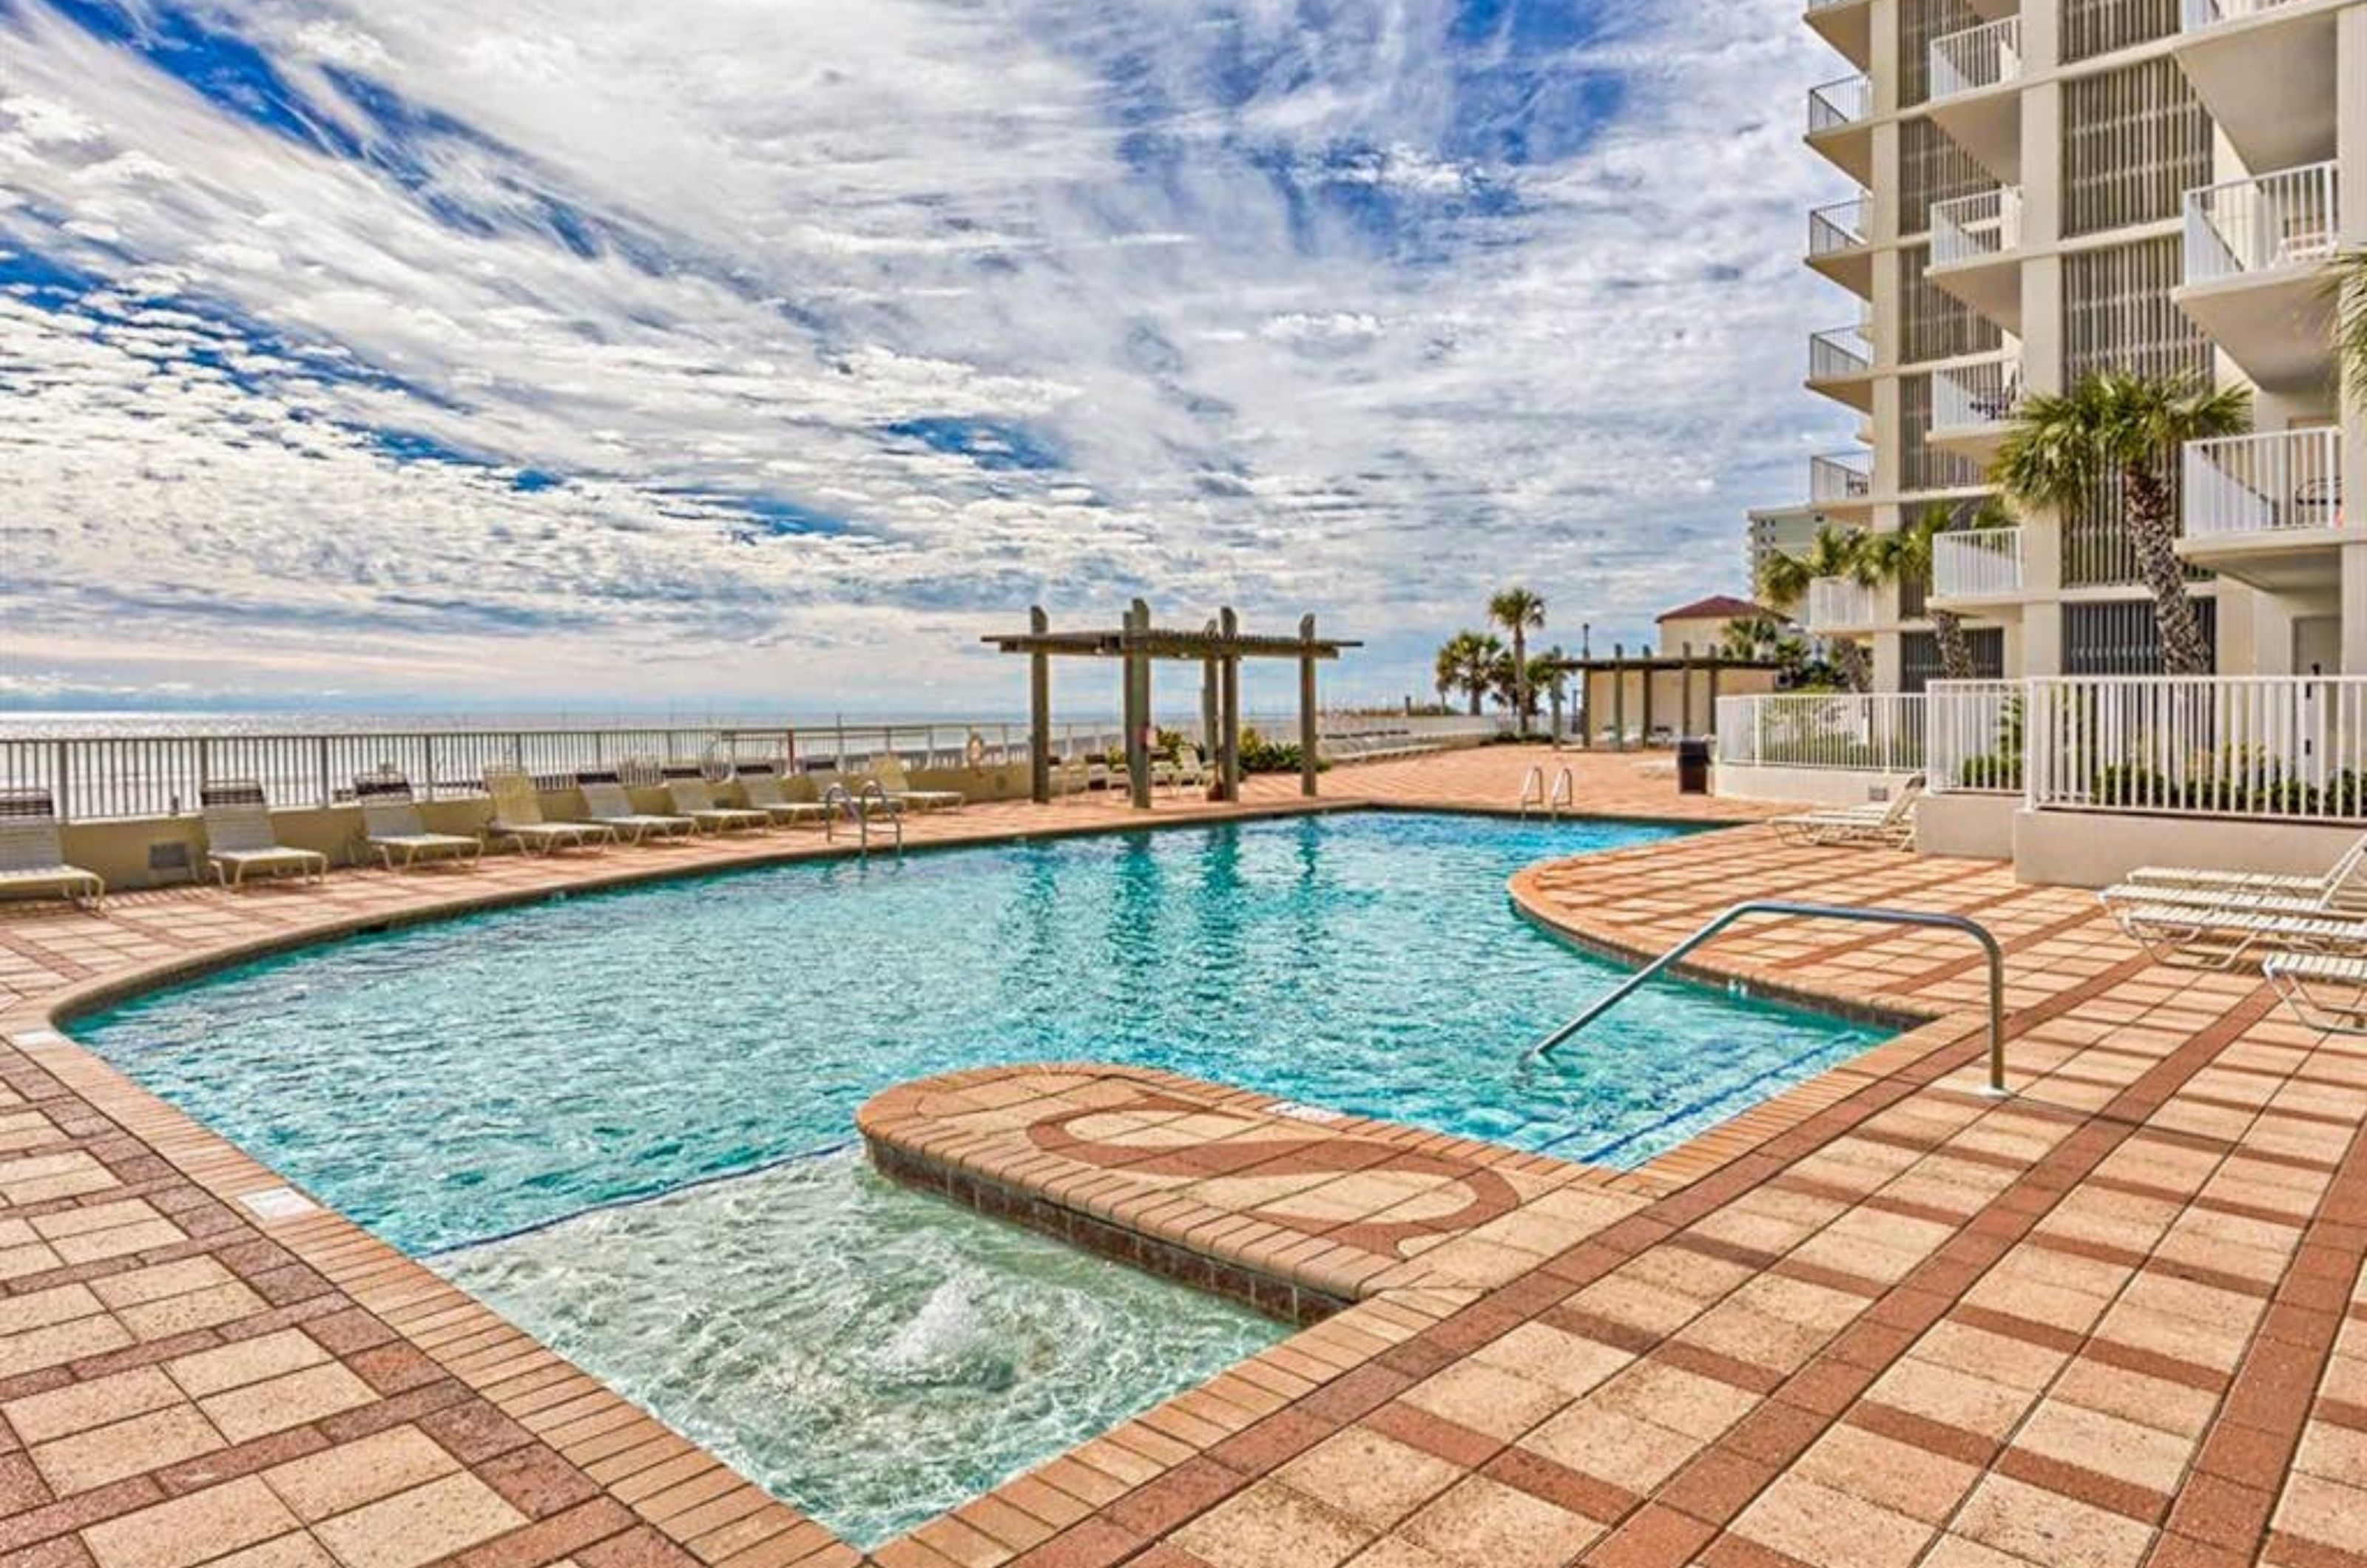 The outdoor swimming pool at Shoalwater Condominiums in Orange Beach Alabama 